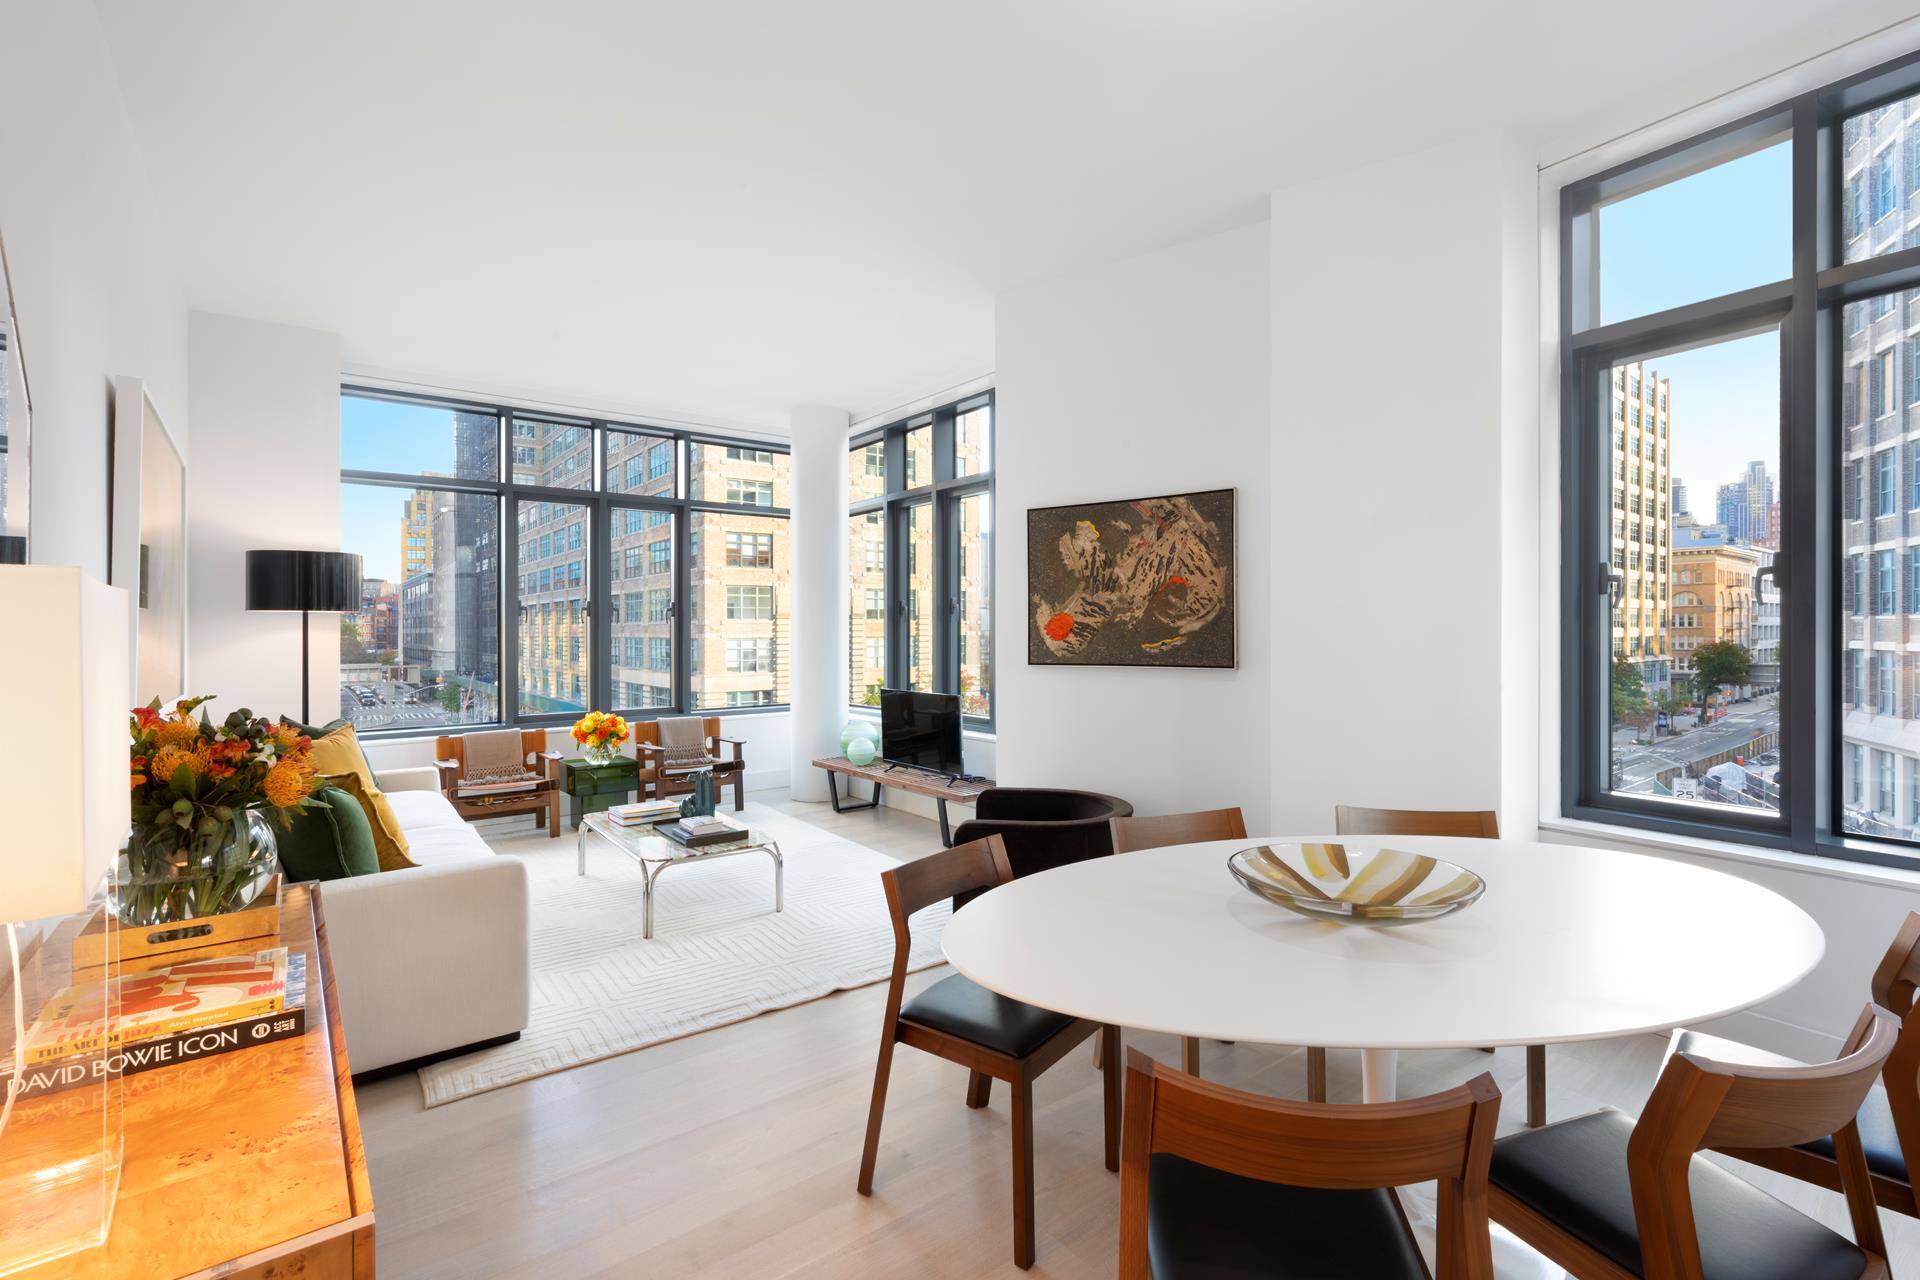 Introducing residence 2B at The Riverview, a new boutique residential condominium with architecture and interiors by award winning Rawlings Architects, located at the crossroads of TriBeCa, the West Village, and ...